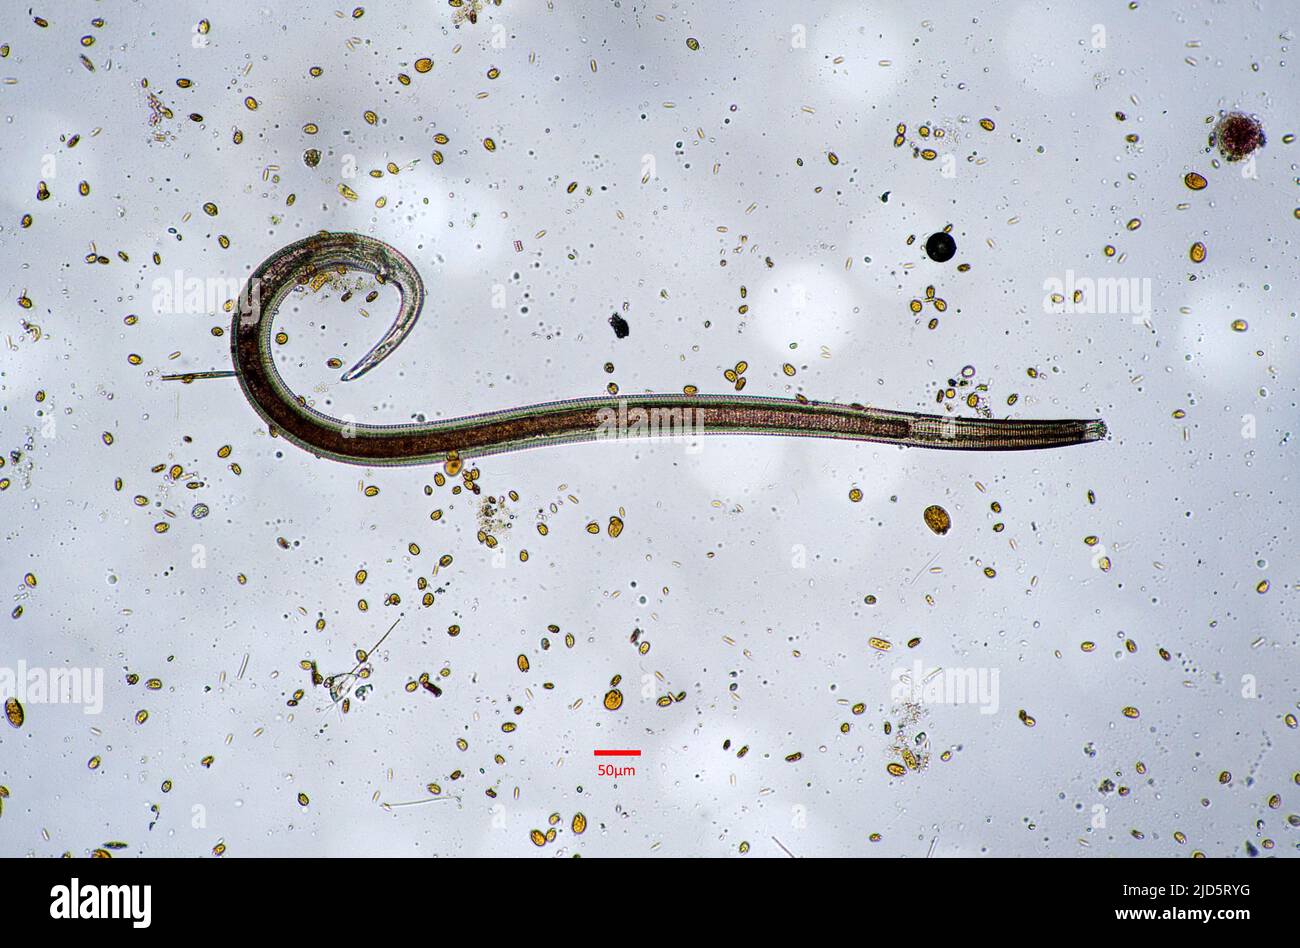 A roundworm collected from a marine aquarium. Stock Photo